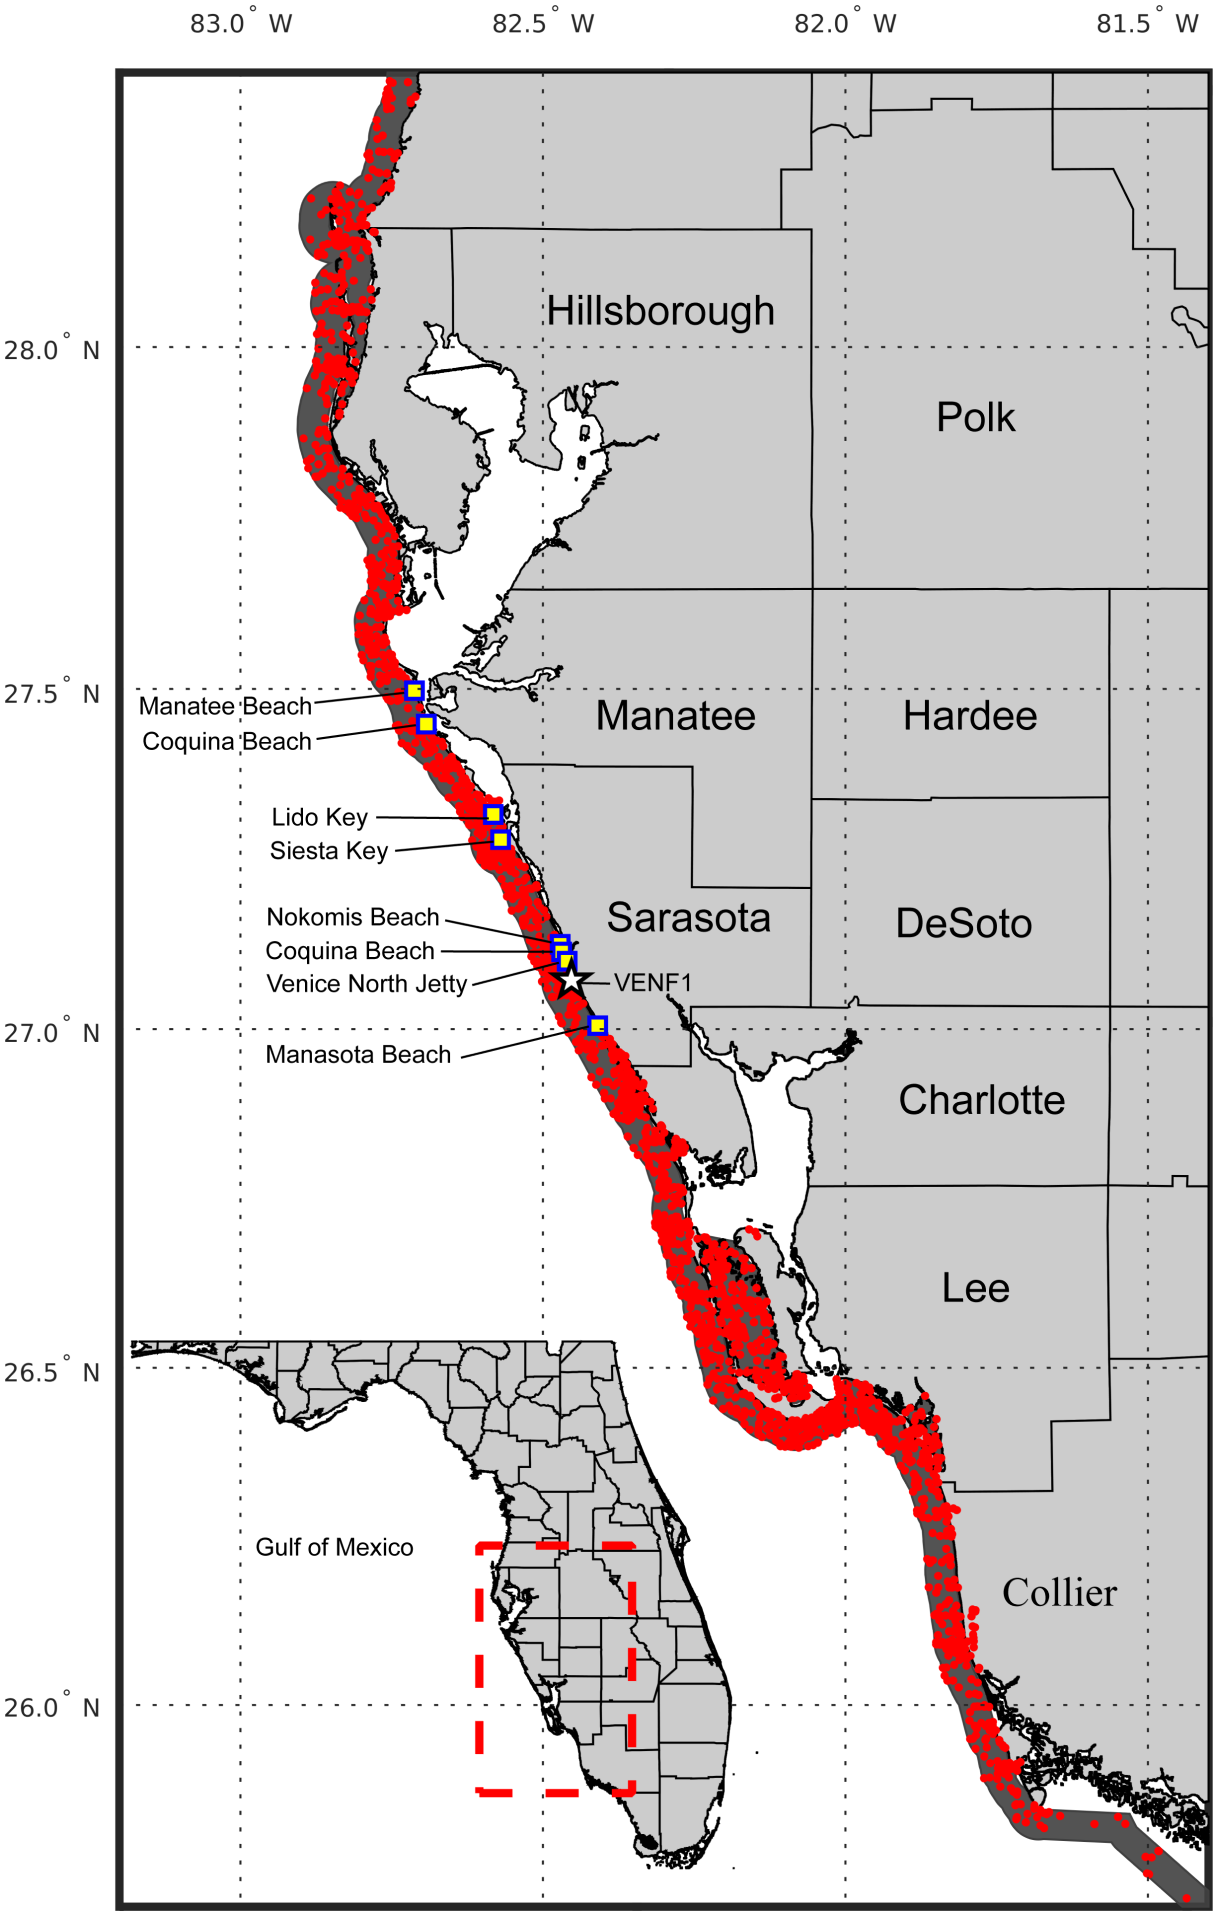 Historical Data Used to Analyze Red Tide Bloom Dynamics in Southwest Florida